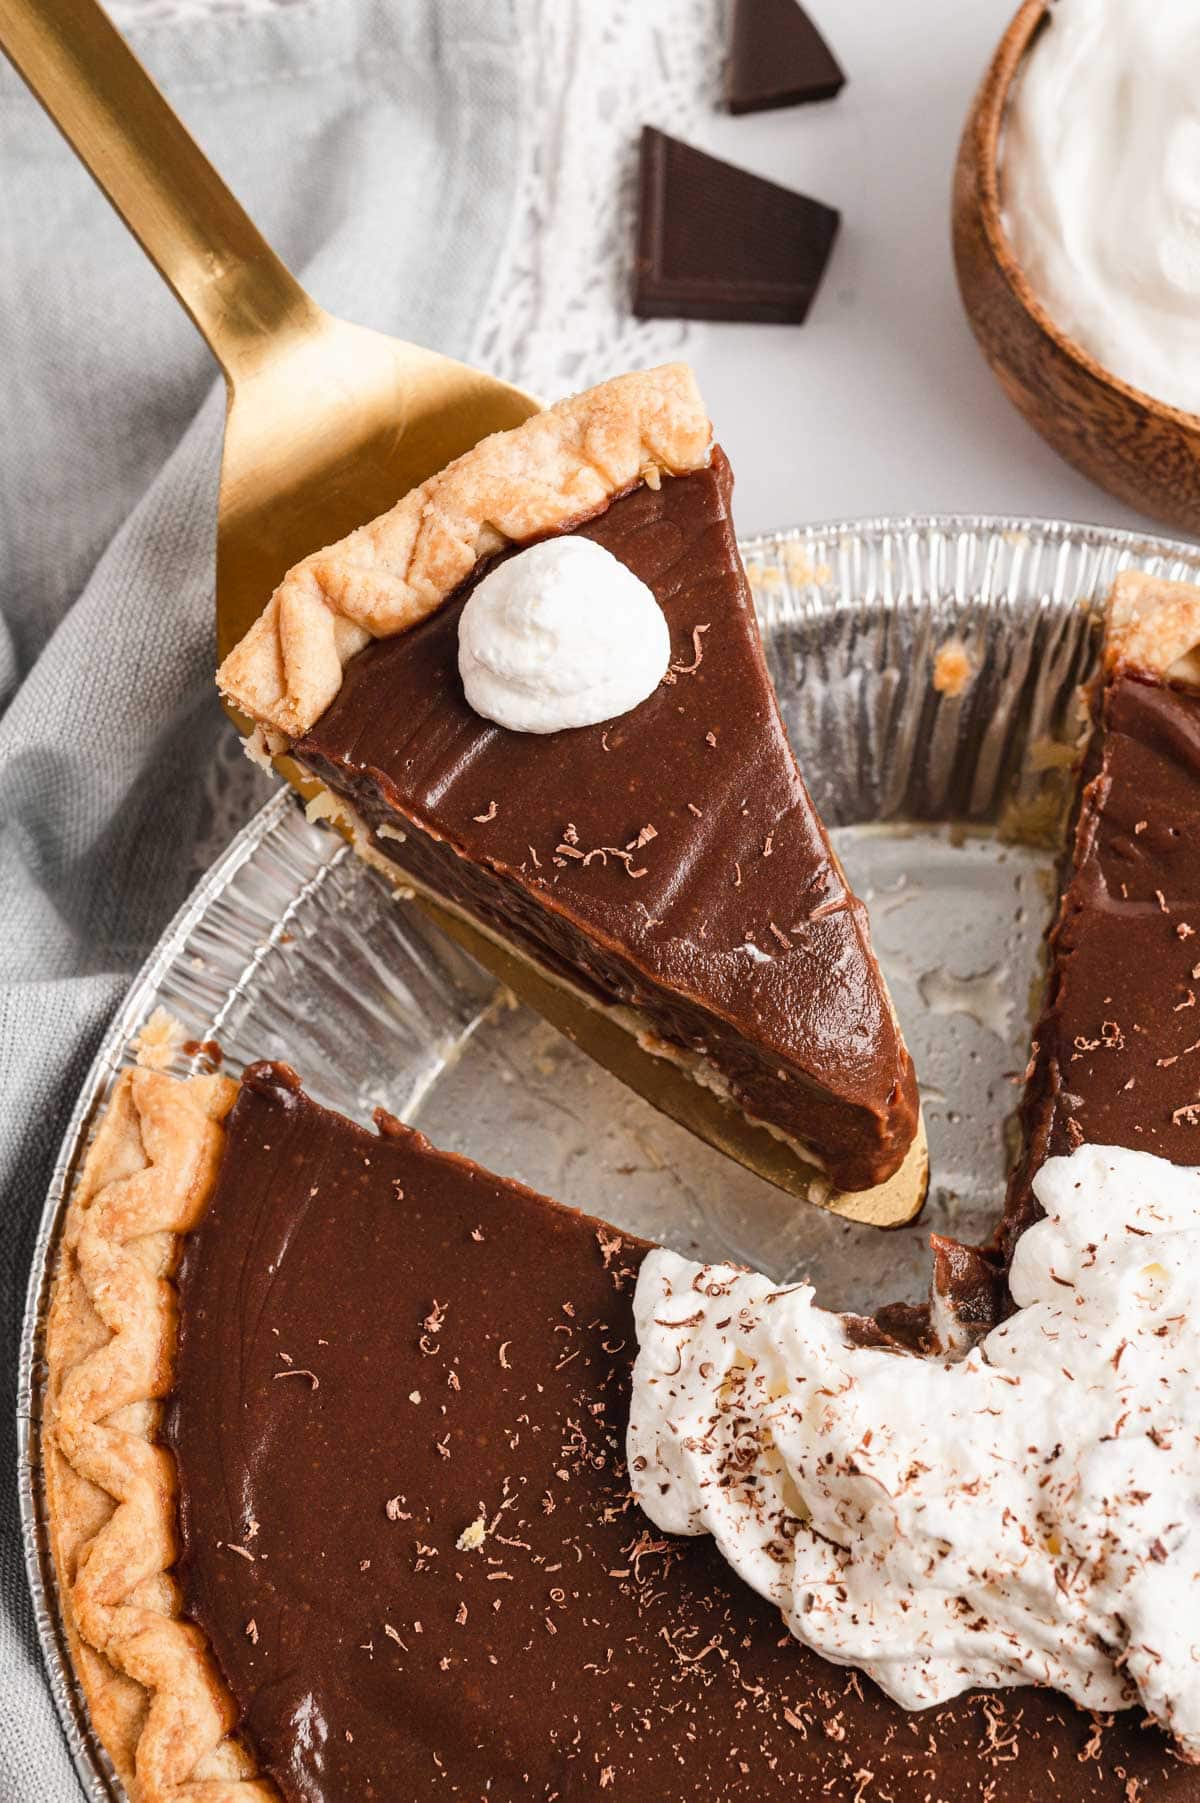 Chocolate pie sliced with whipped cream on top.